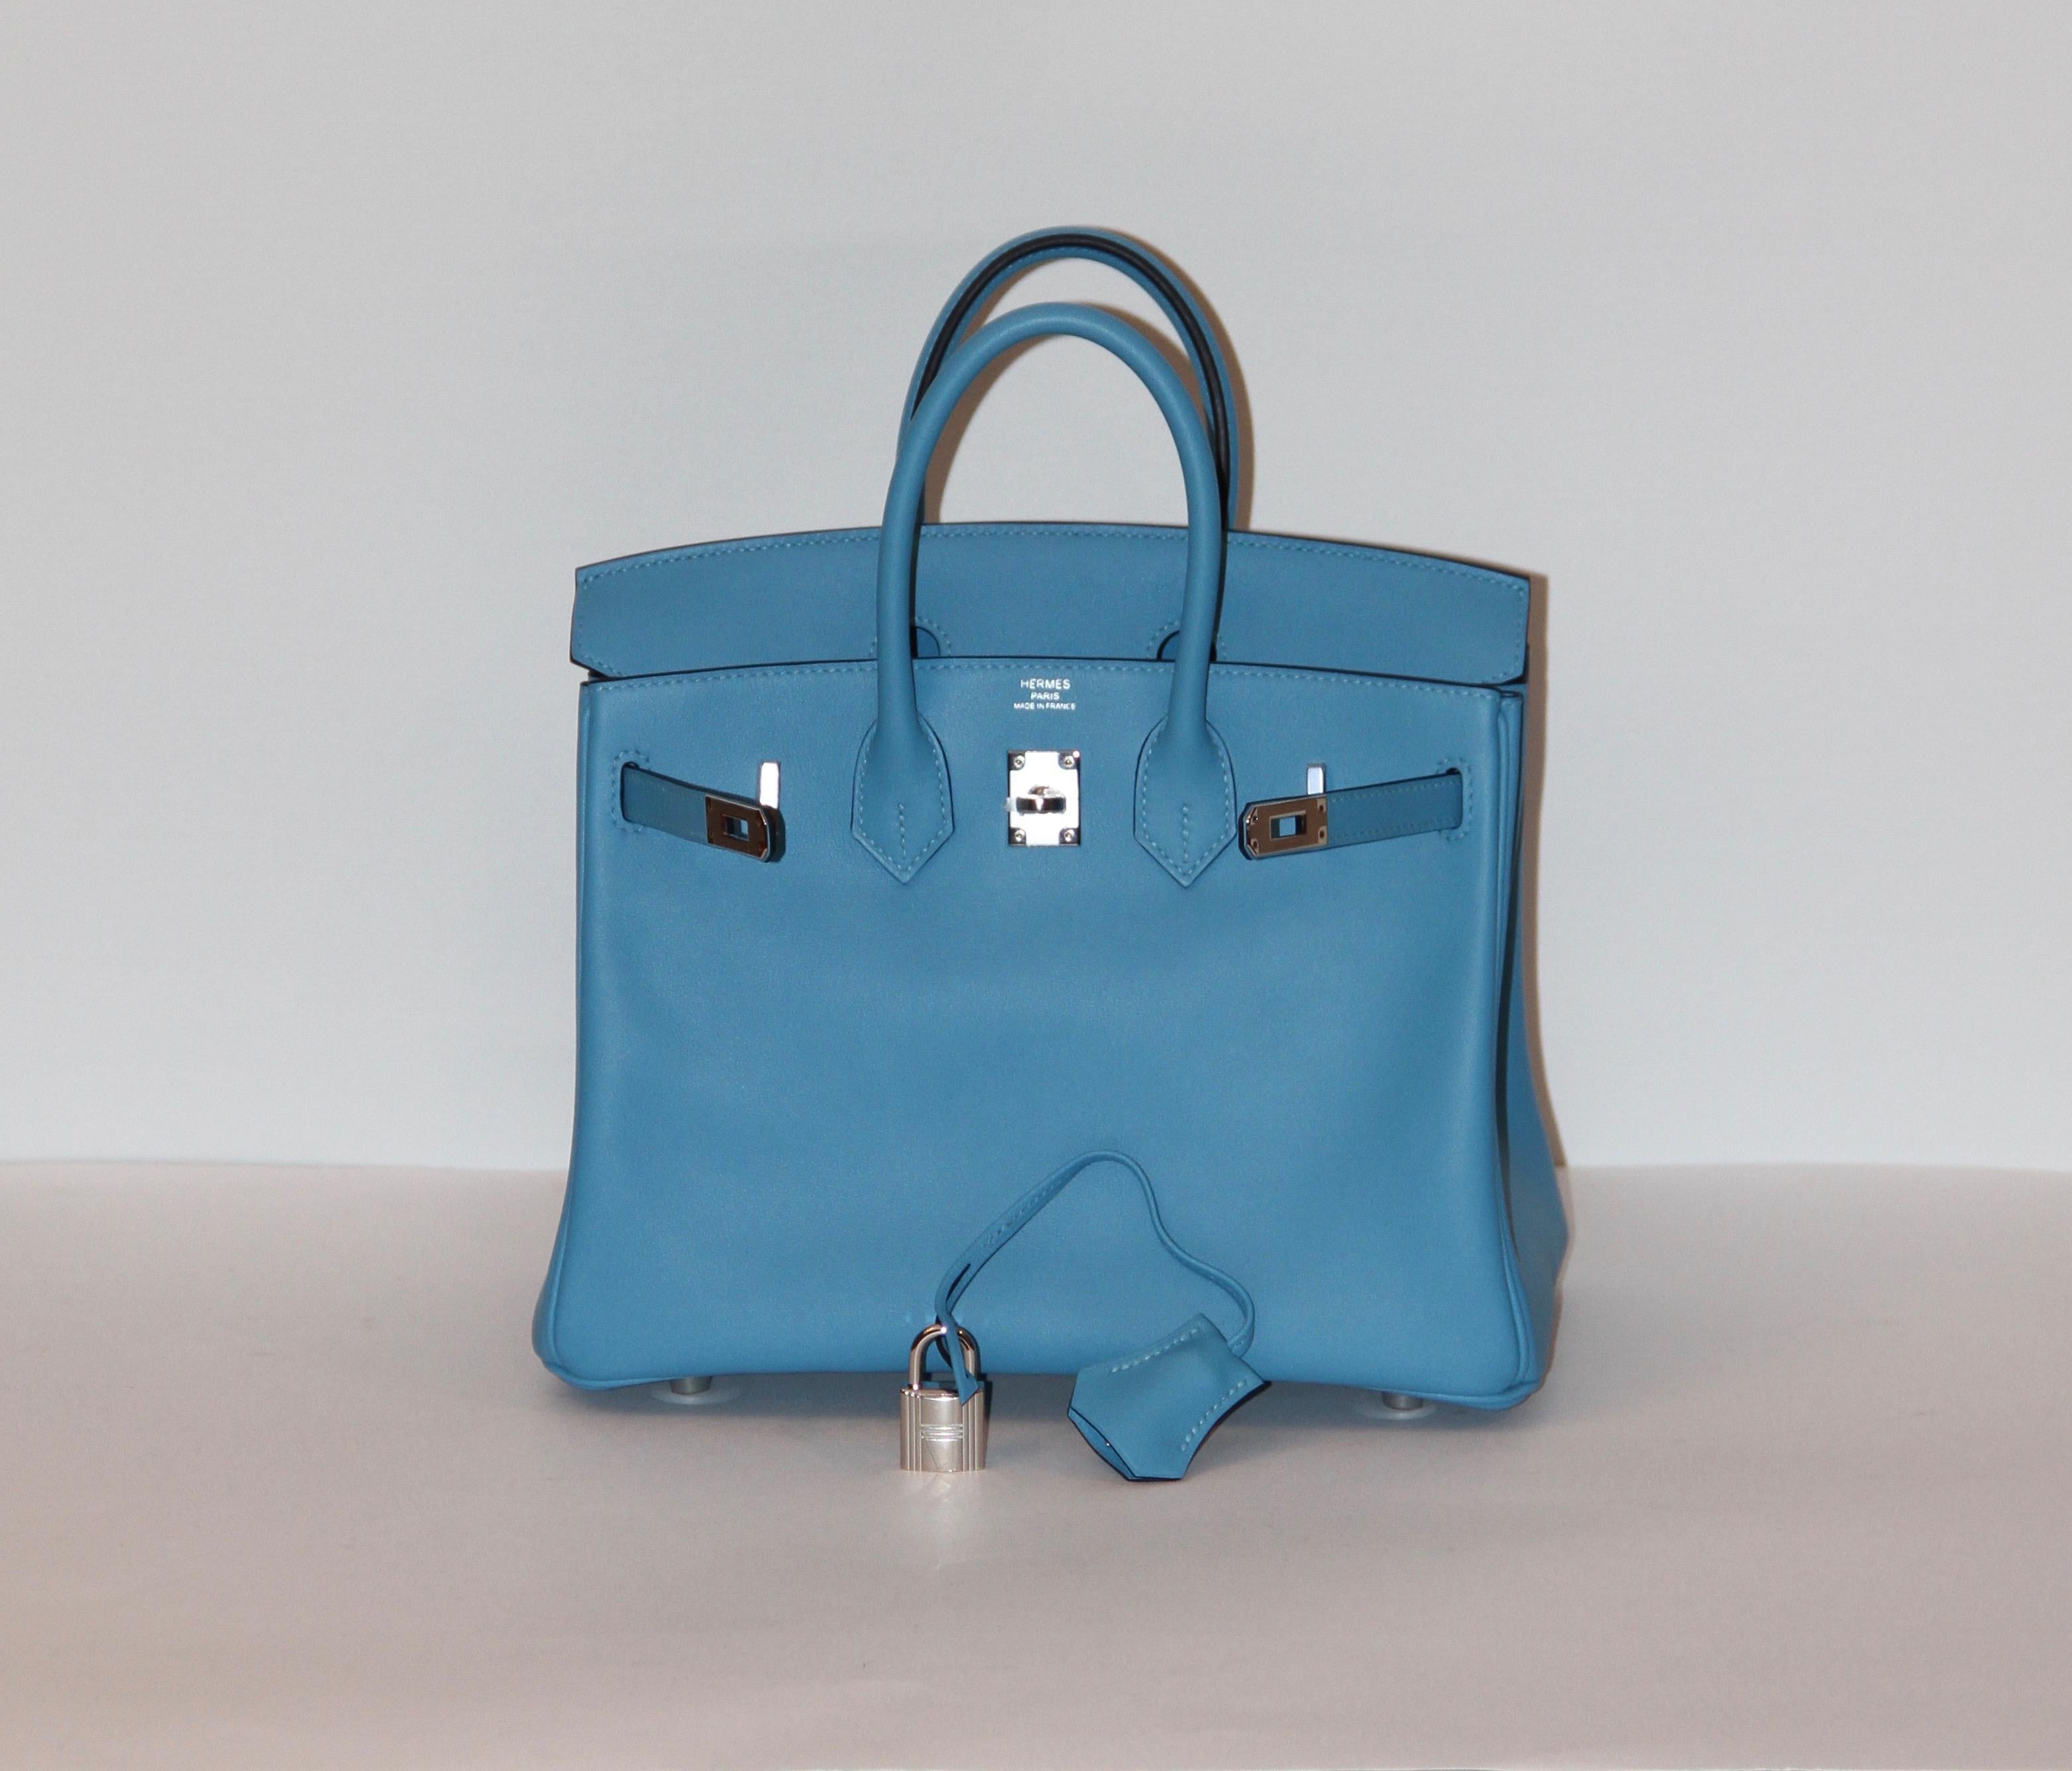 Absolutely new in its box with all accessories, this beautiful Birkin 25 is crafted in a Bleu du Nord Swift leather with white stitches.
All metal parts are made of  Palladium. (covered with plastic) 

Year: June 2019
Material: Swift leather
Color: